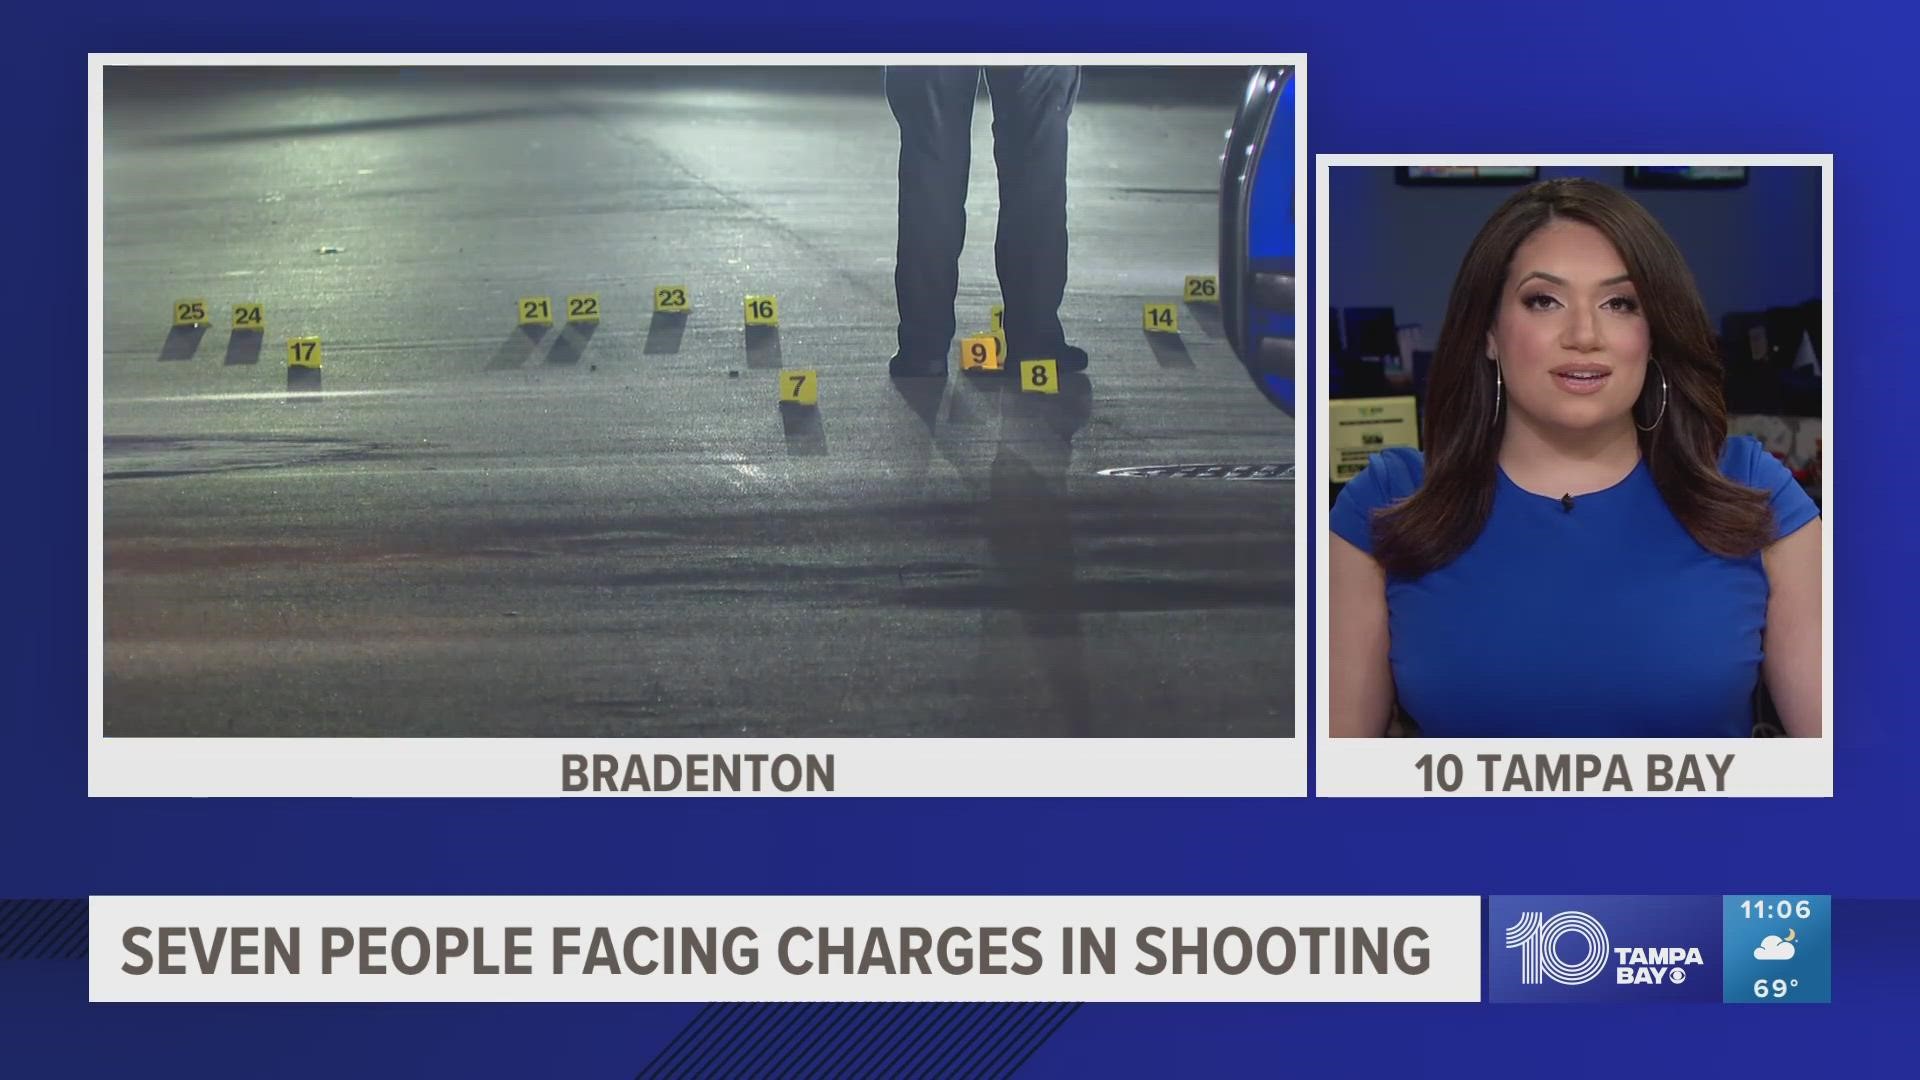 Bradenton police said Tuesday that one person shot from the incident was pronounced dead.